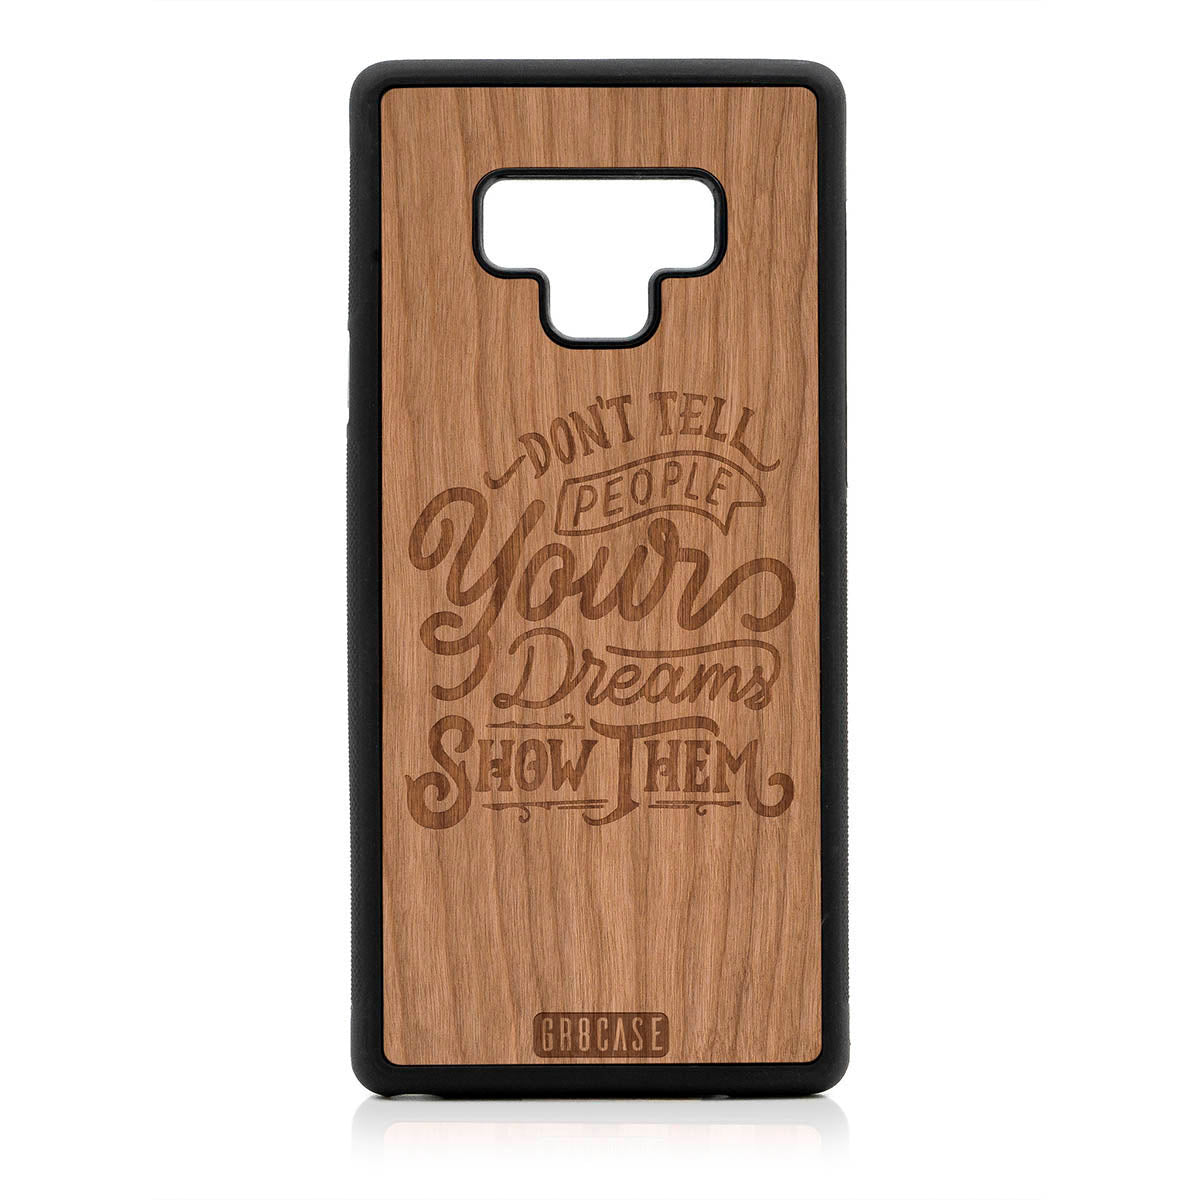 Don't Tell People Your Dreams Show Them Design Wood Case For Samsung Galaxy Note 9 by GR8CASE